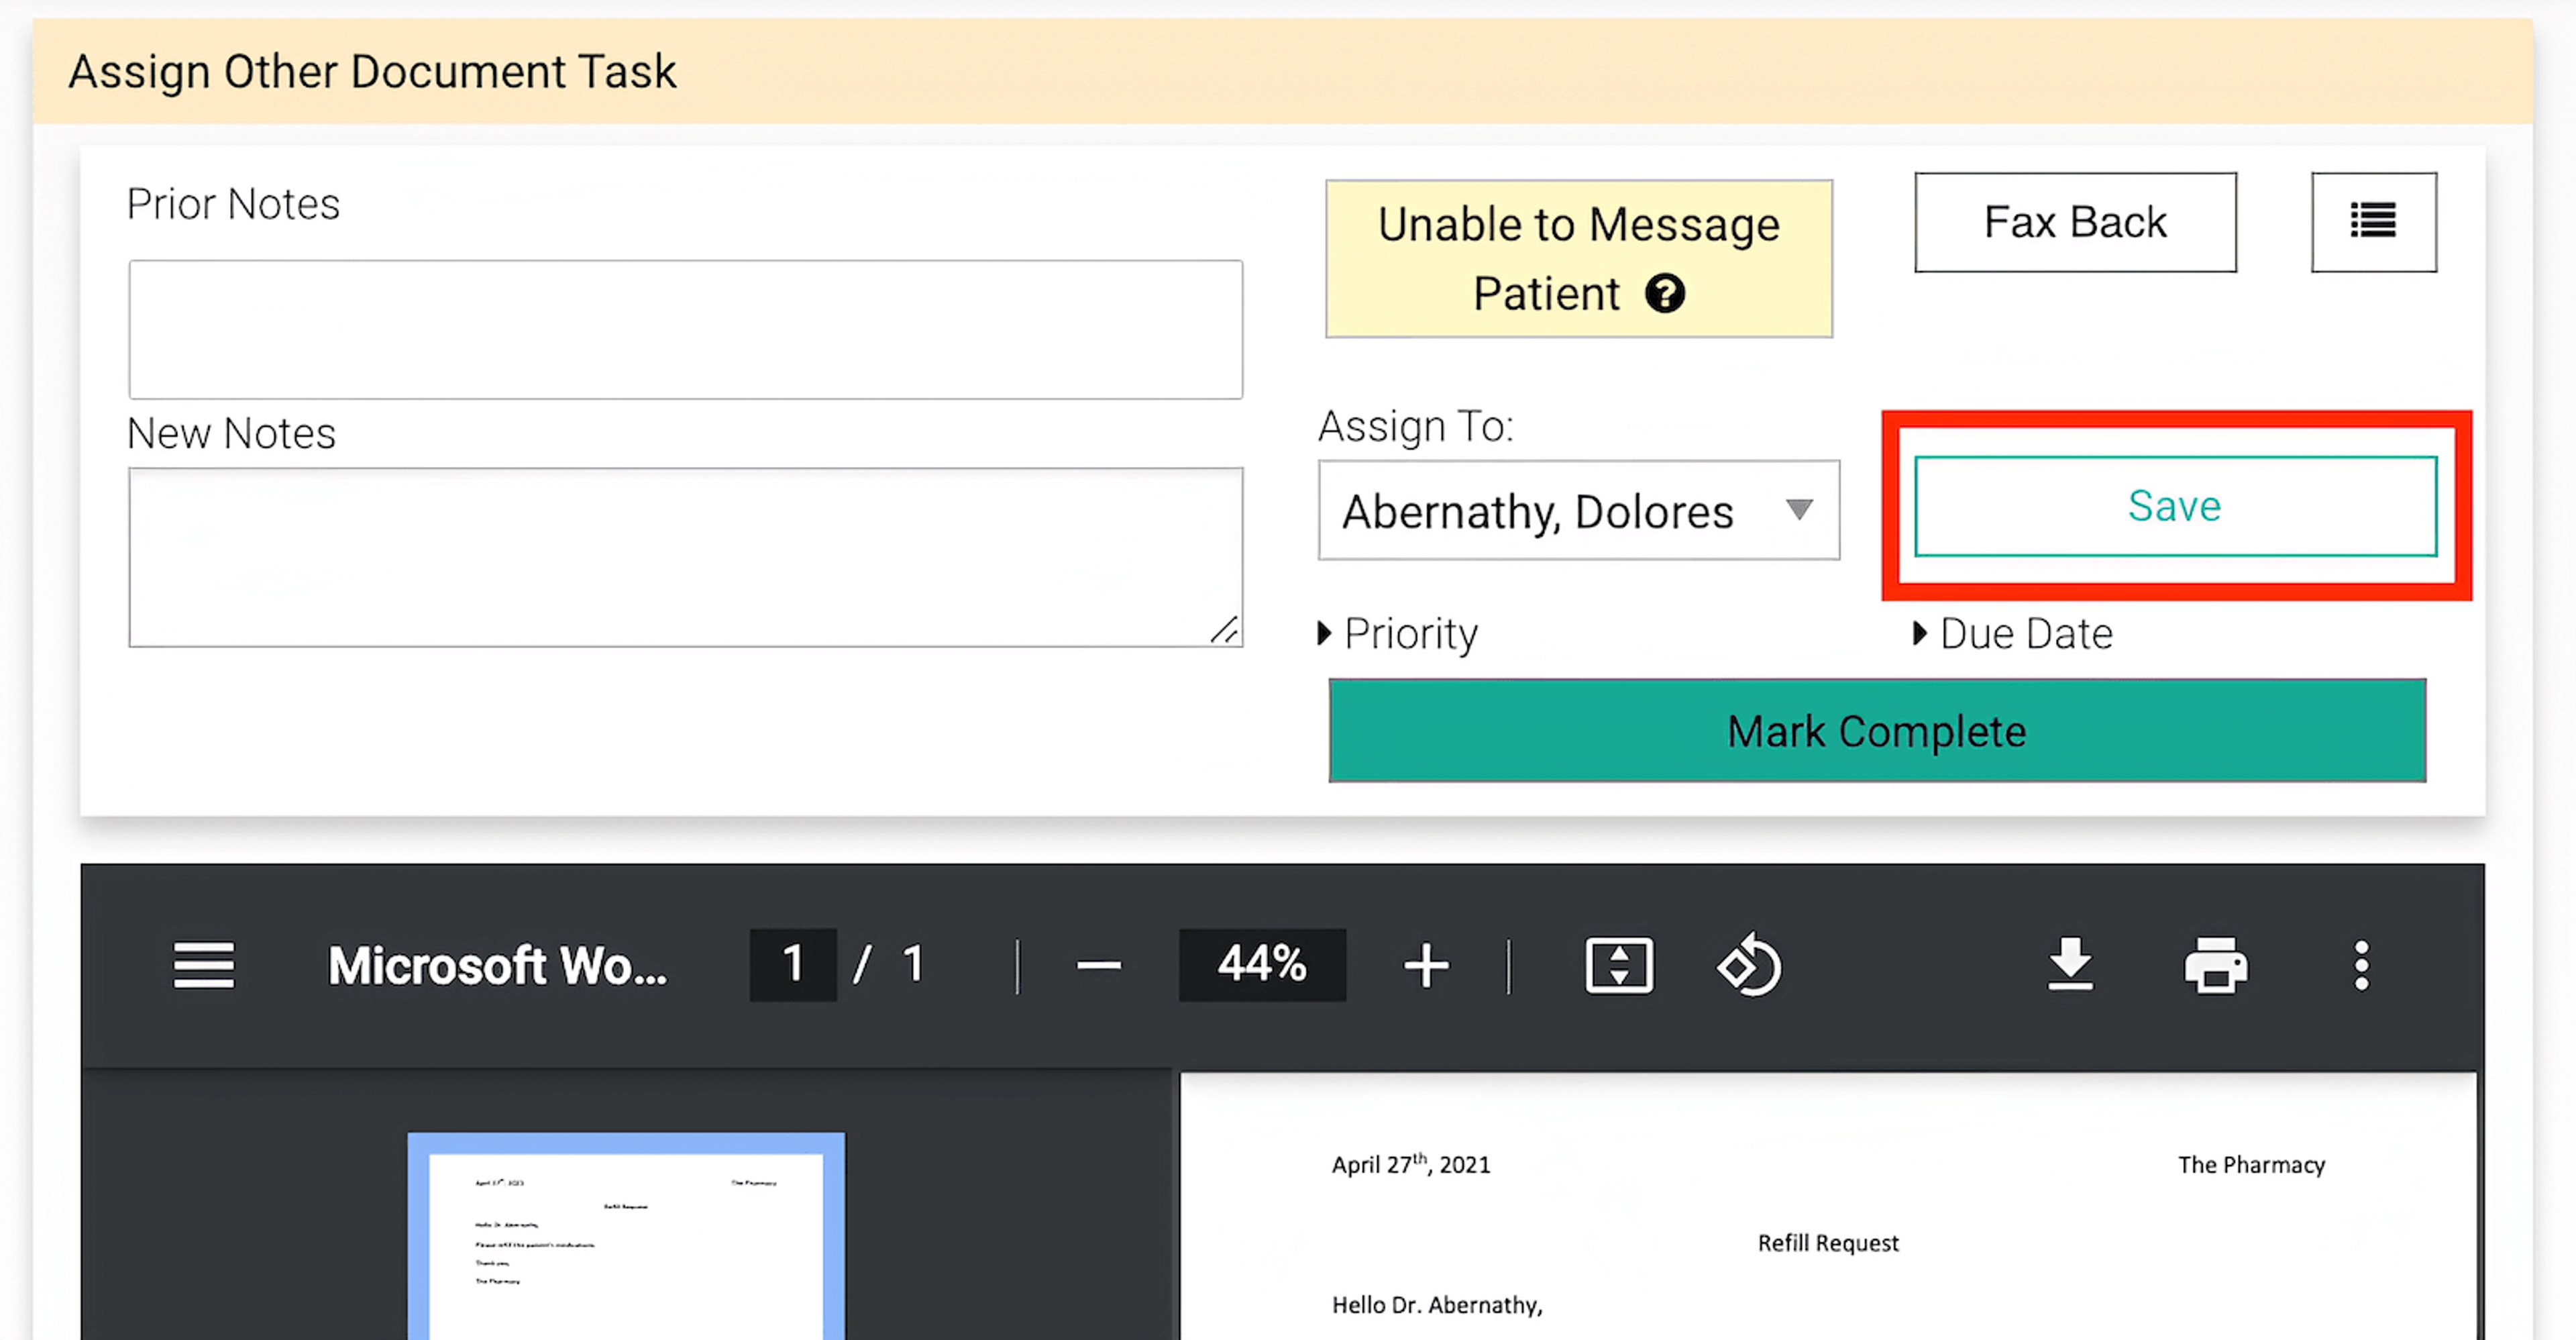 Assign Other Document Task workspace with the Save button highlighted in red.